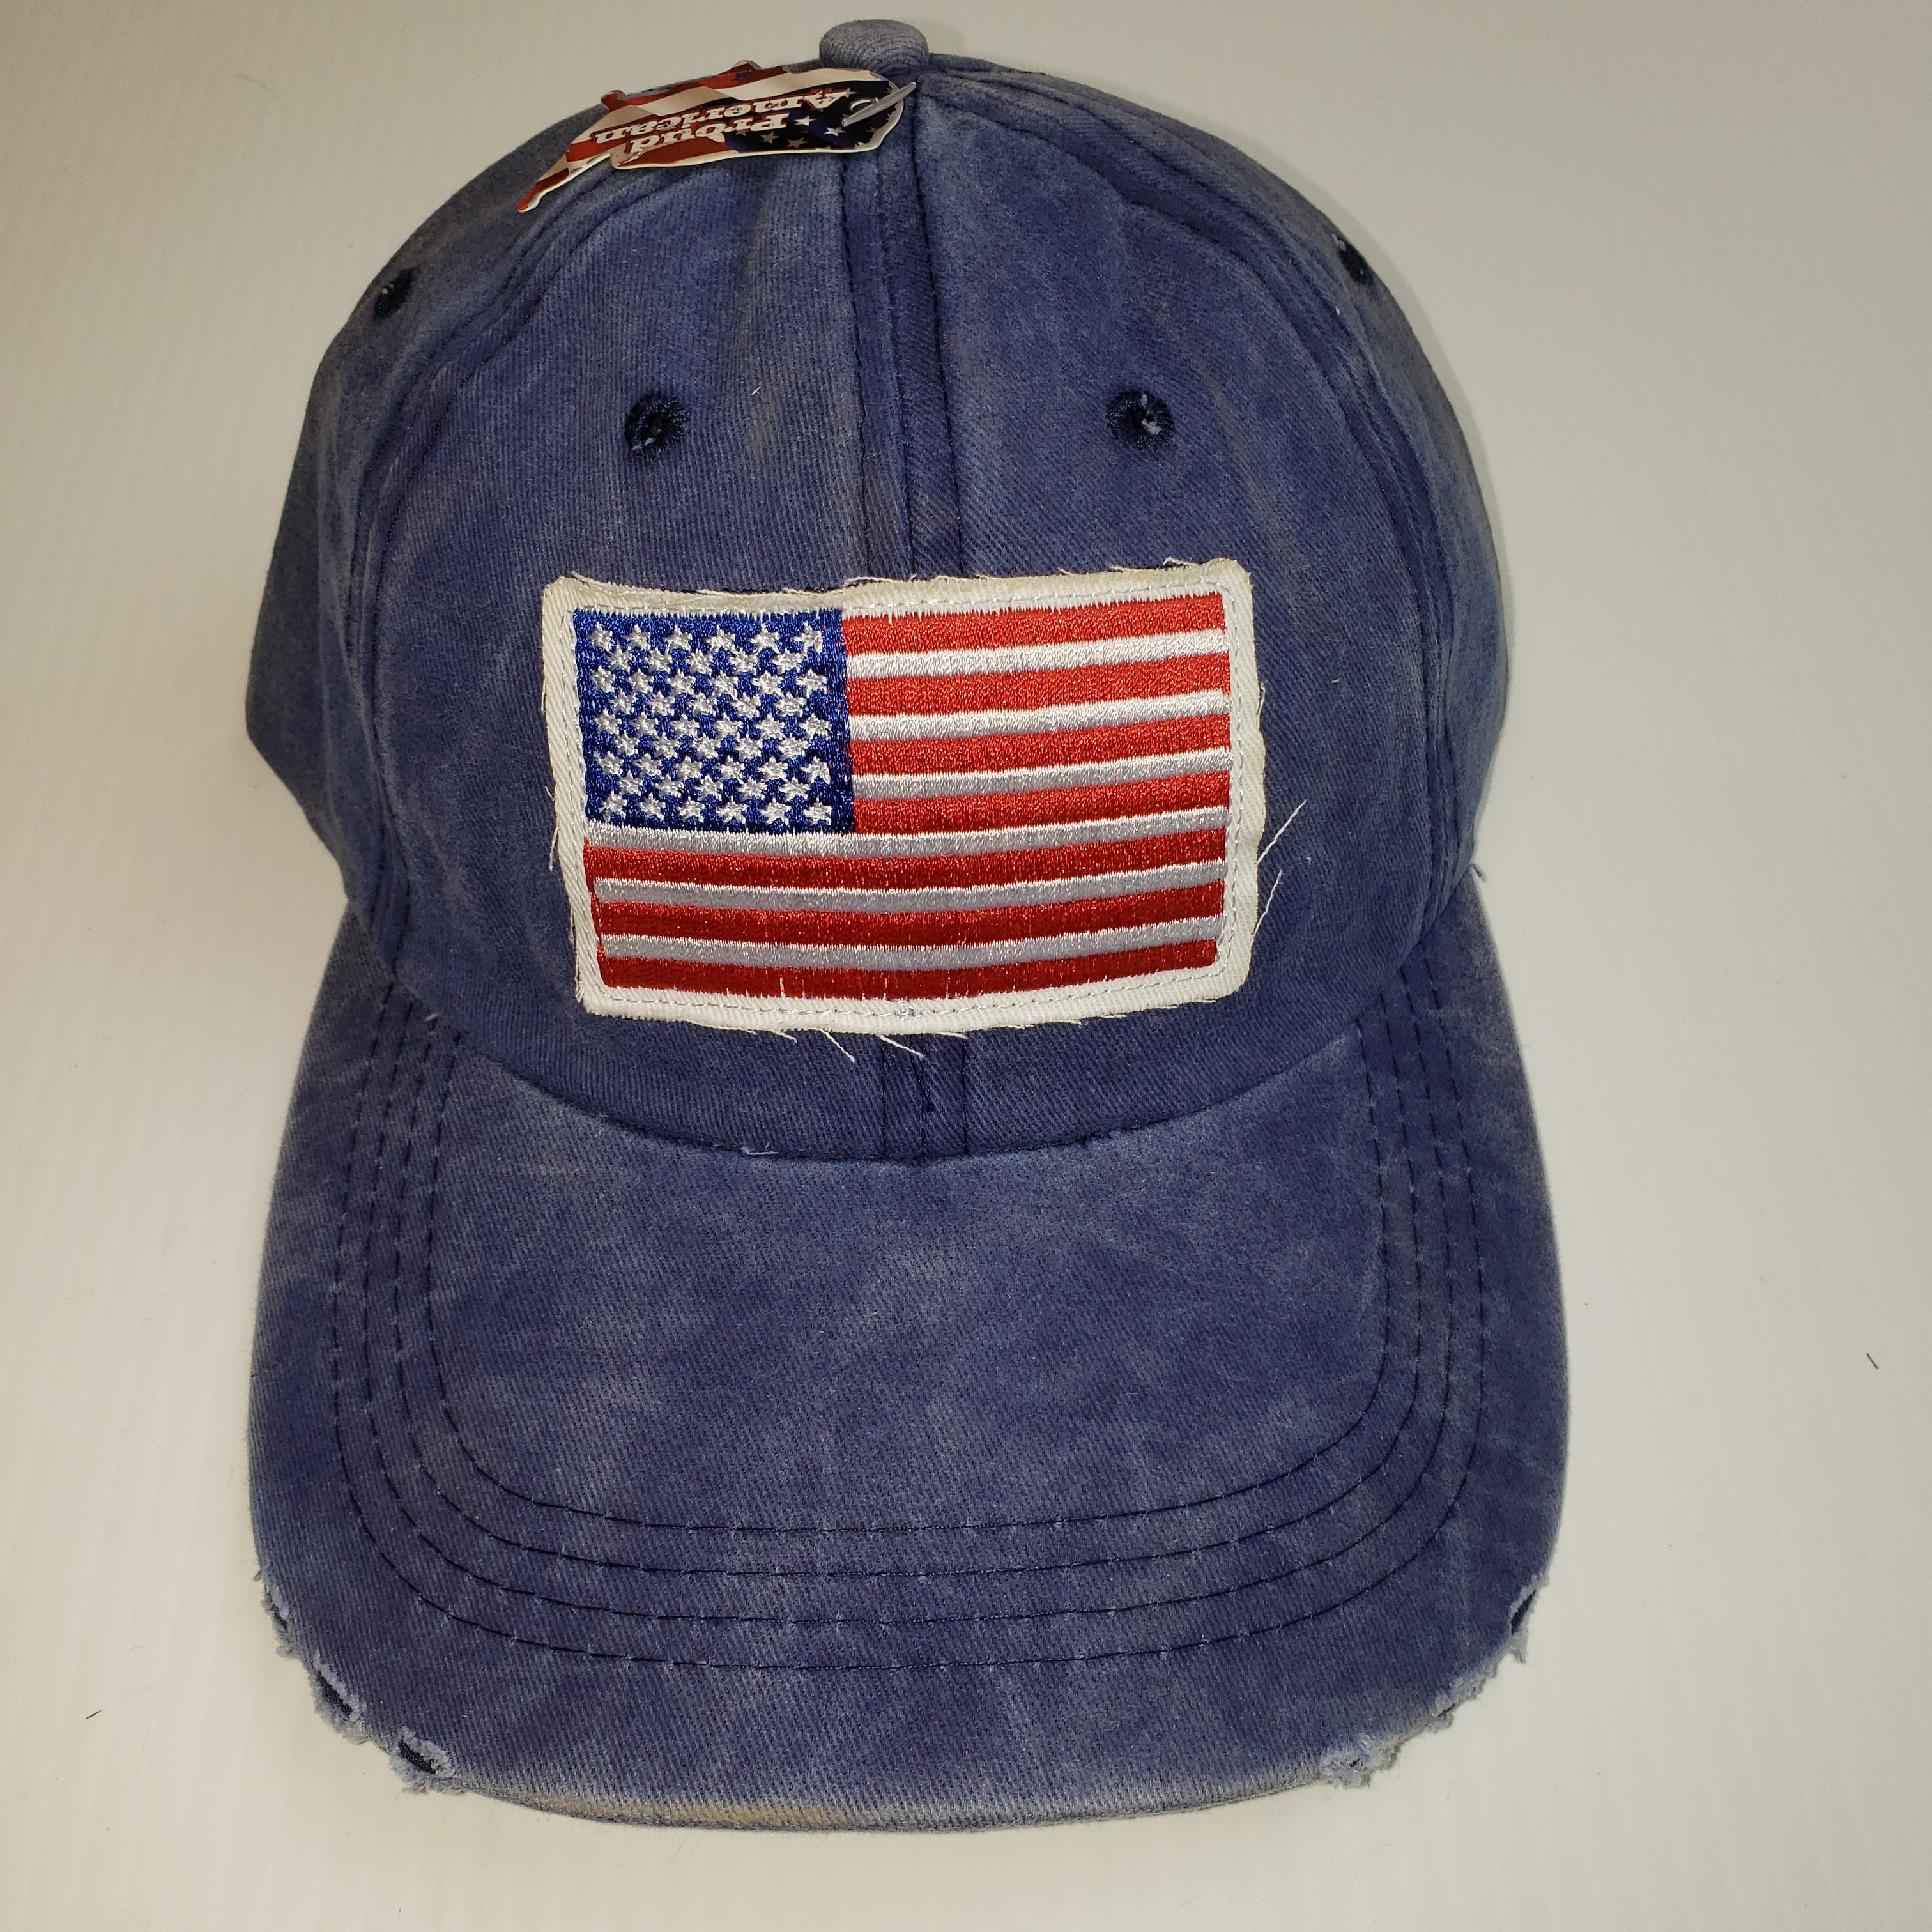 Proud American Distressed Hat w/ American Flag Patch | eBay